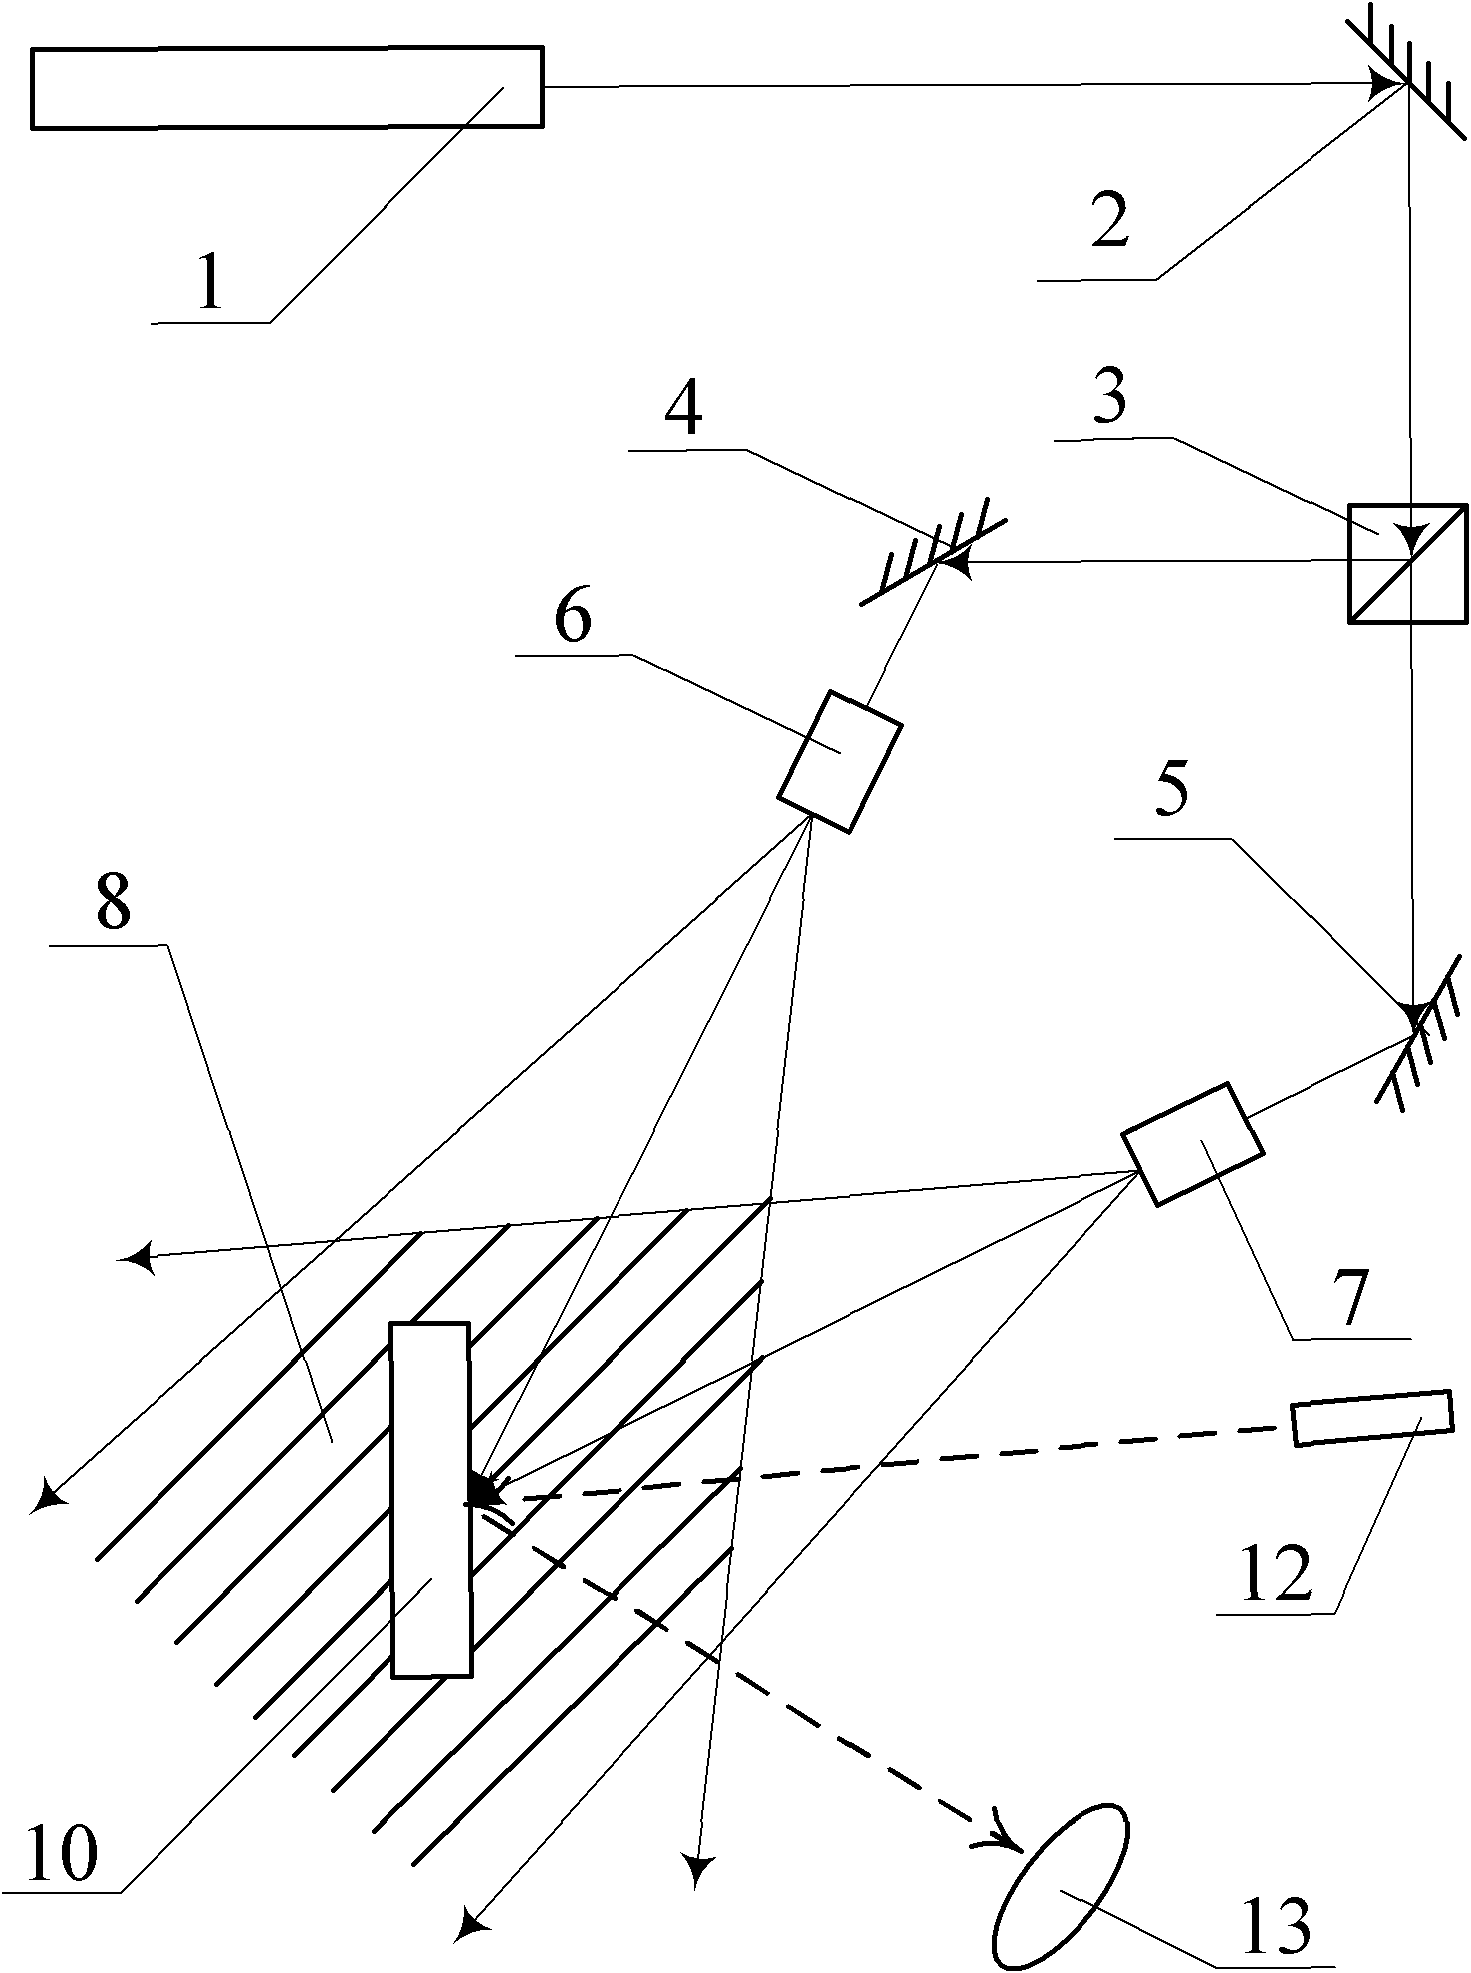 Method for adjusting real-time monitor device in exposure path of concave holographic grating